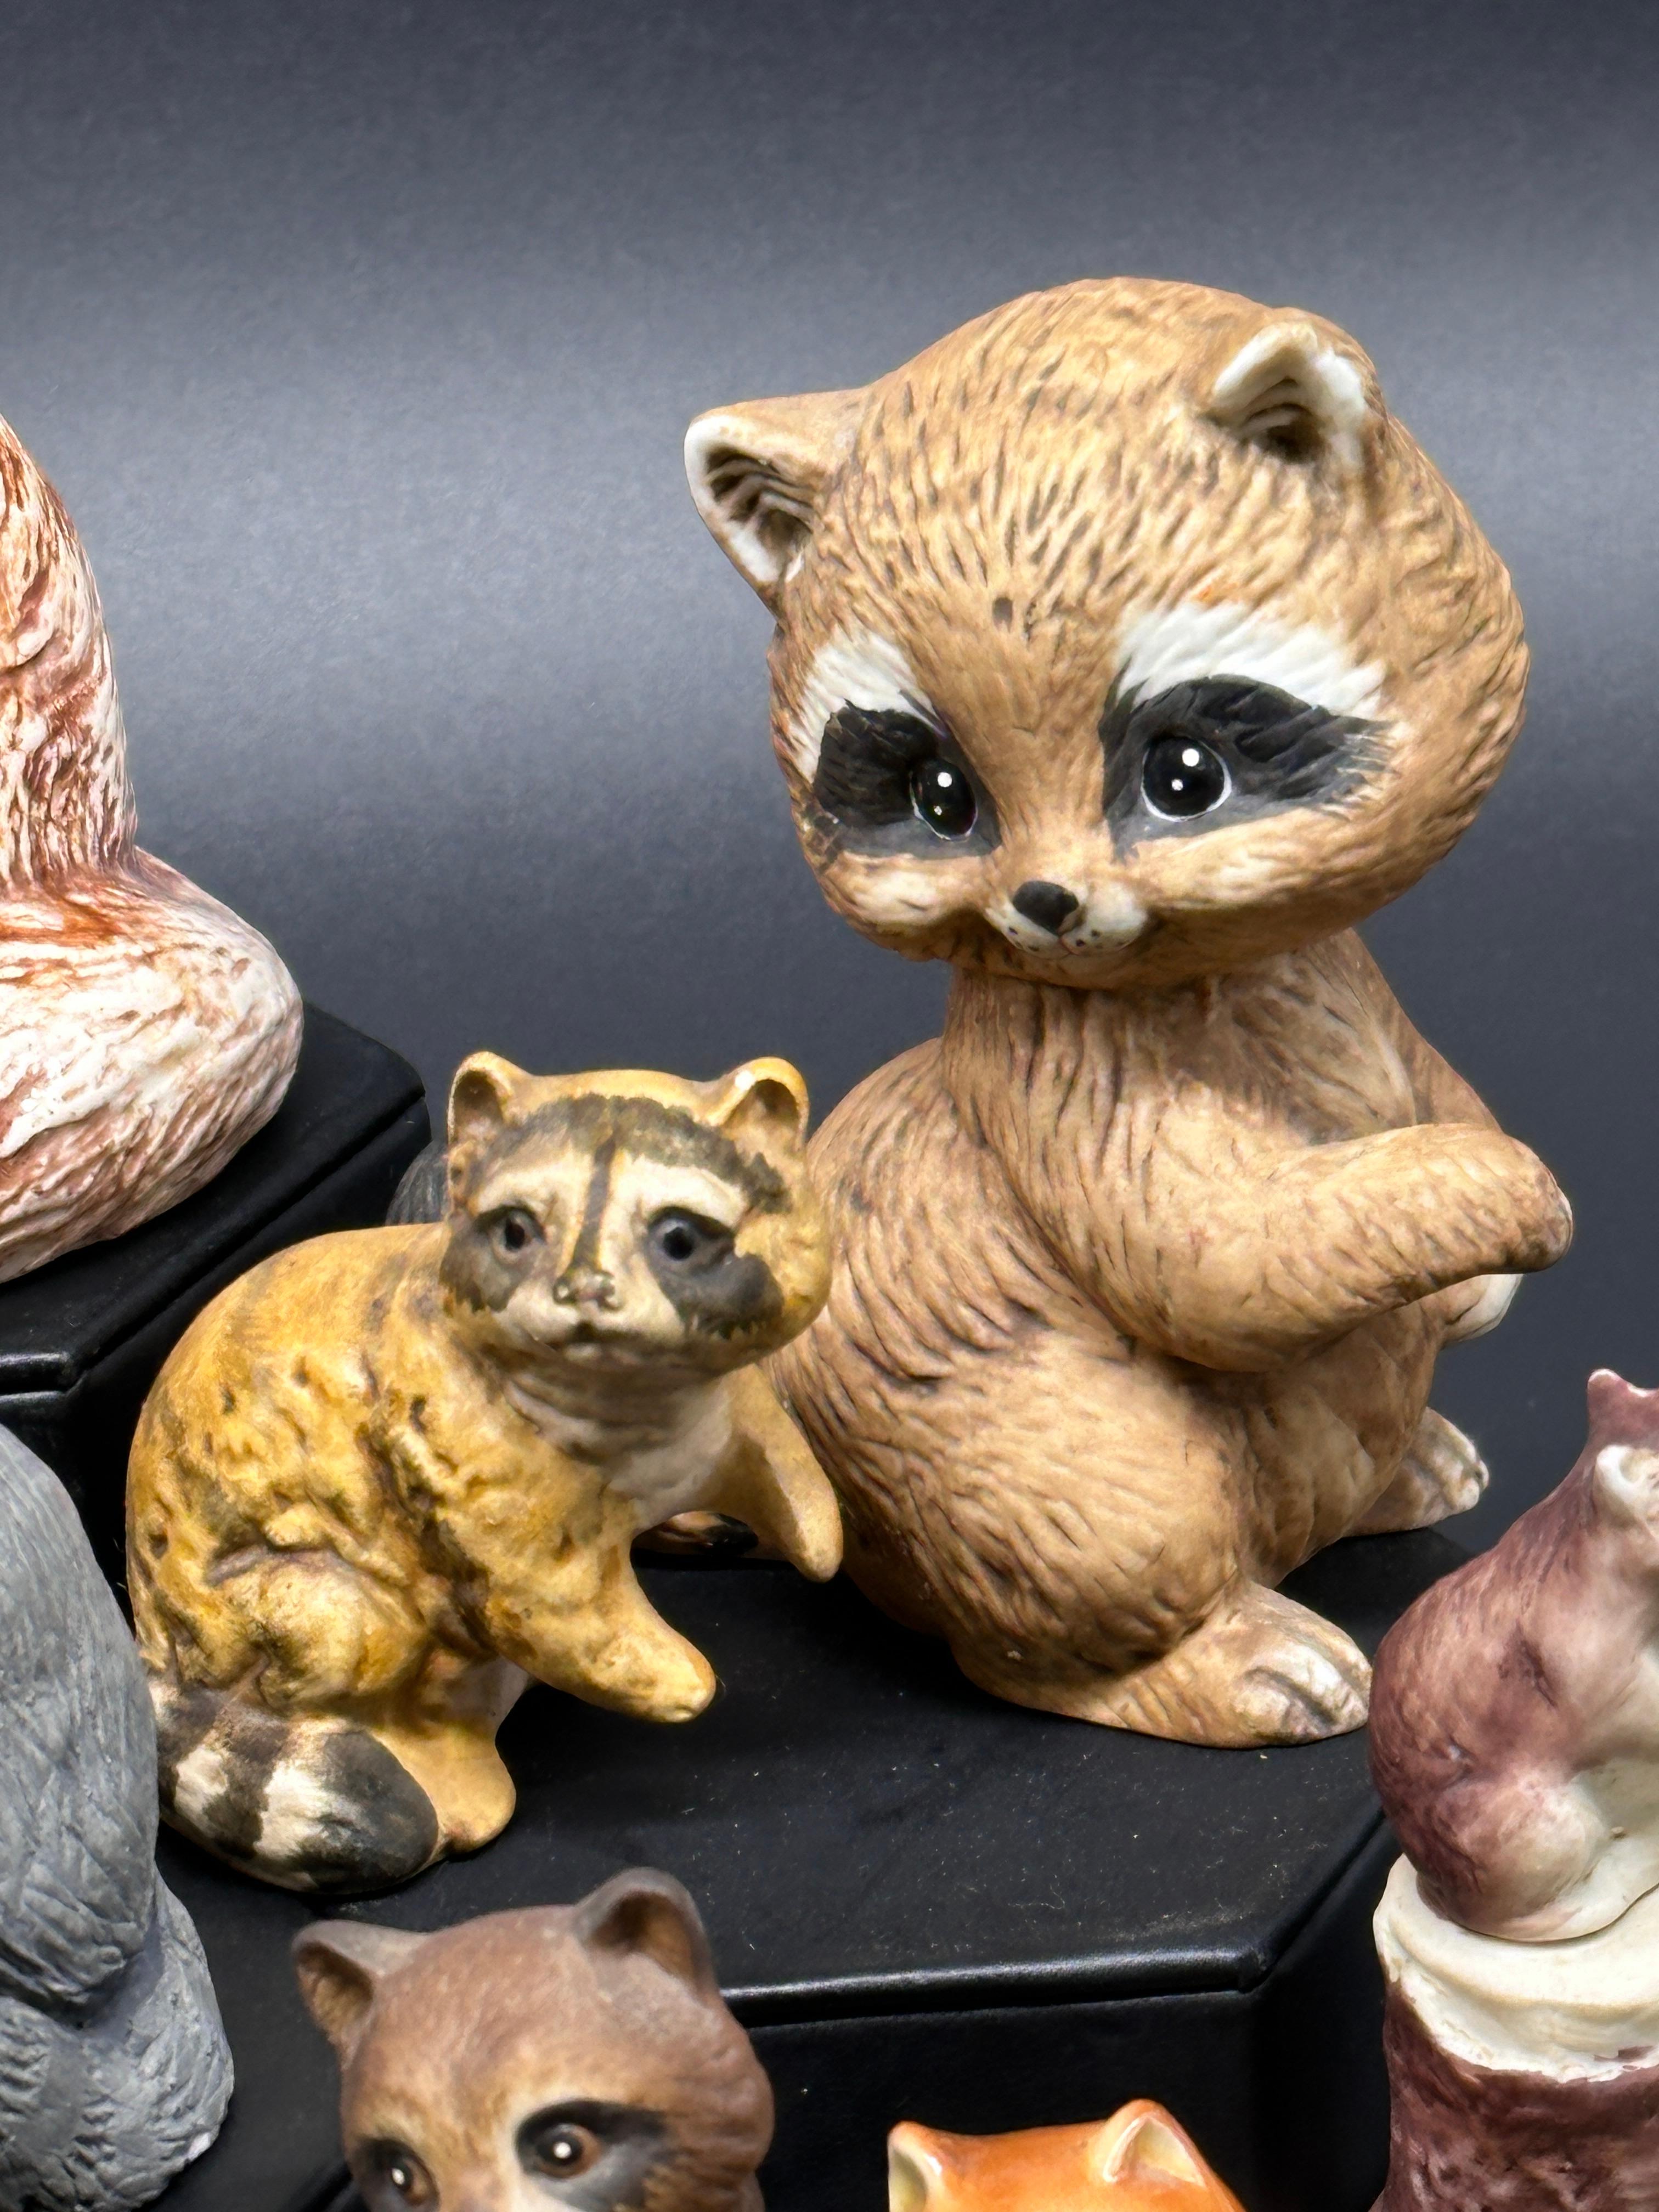 Assortment of Raccoon Collectible Figurines and More